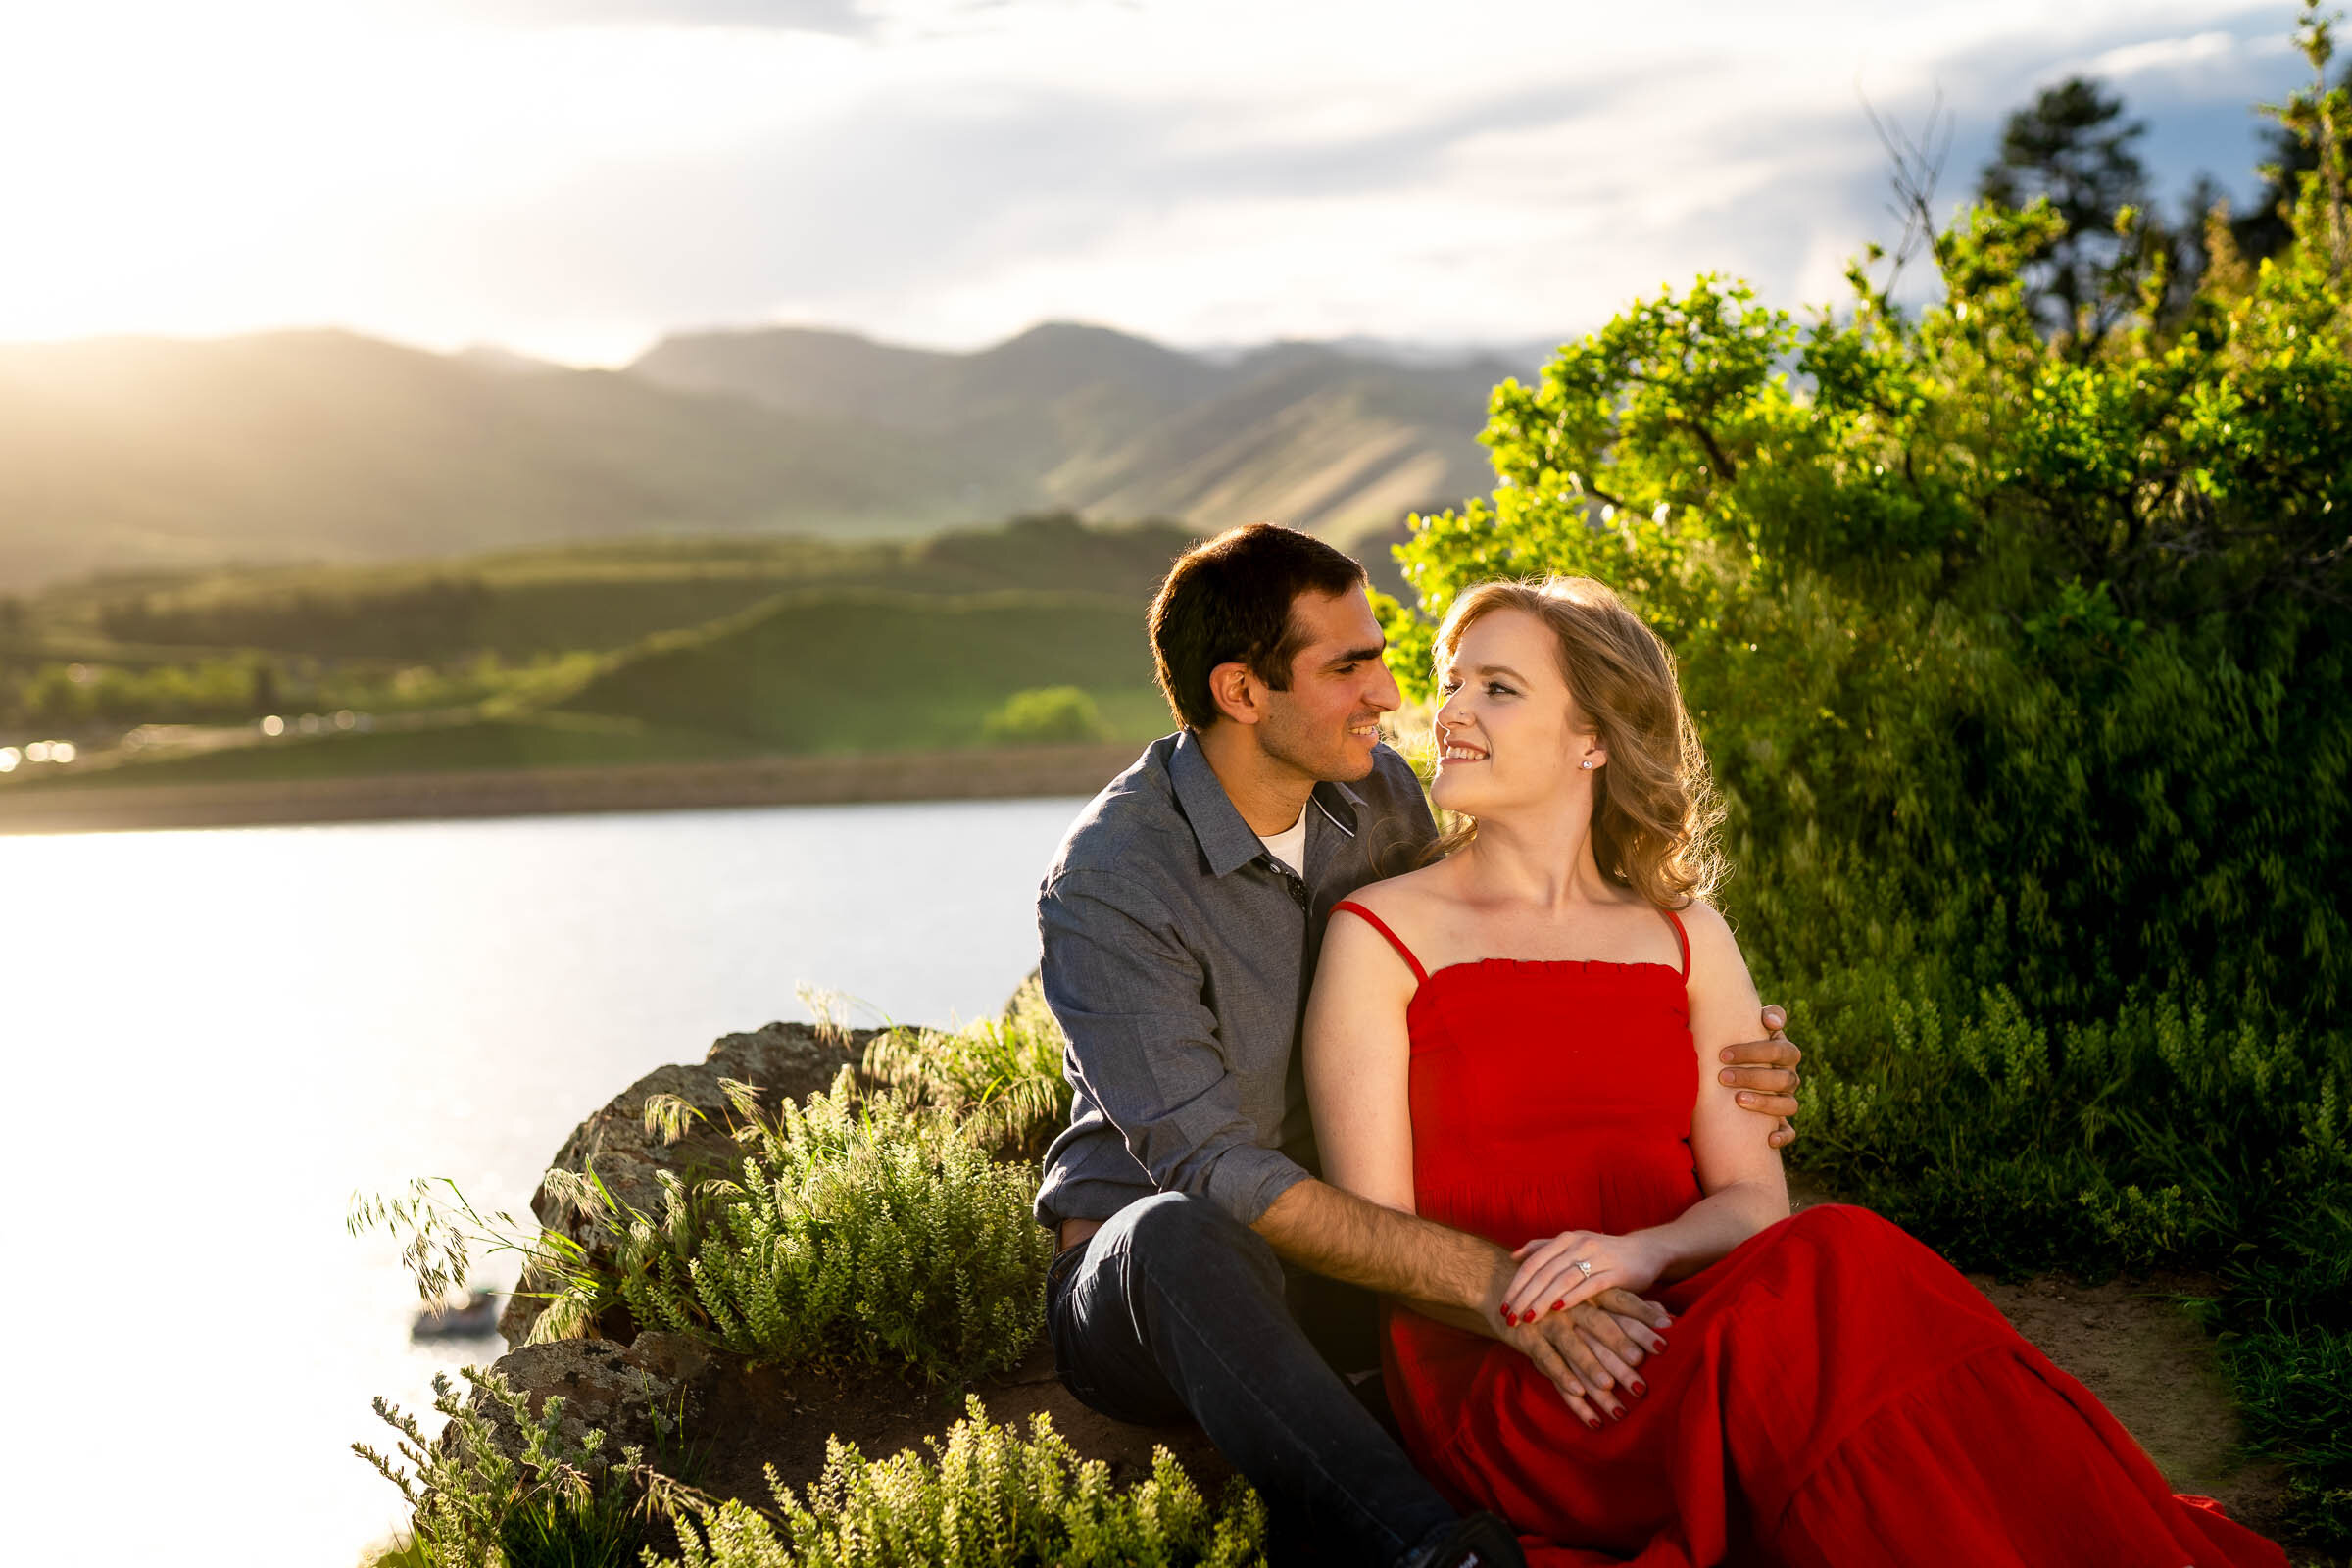 Engaged couple embraces in a luscious green landscape in the foothills during golden hour by the water, Engagement Photos, Engagement Photo Inspiration, Engagement Photography, Engagement Photographer, Spring Engagement Photos, Fort Collins Engagement Photos, Fort Collins engagement photos, Fort Collins engagement photography, Fort Collins engagement photographer, Colorado engagement photos, Colorado engagement photography, Colorado engagement inspiration, Horsetooth Reservoir Engagement